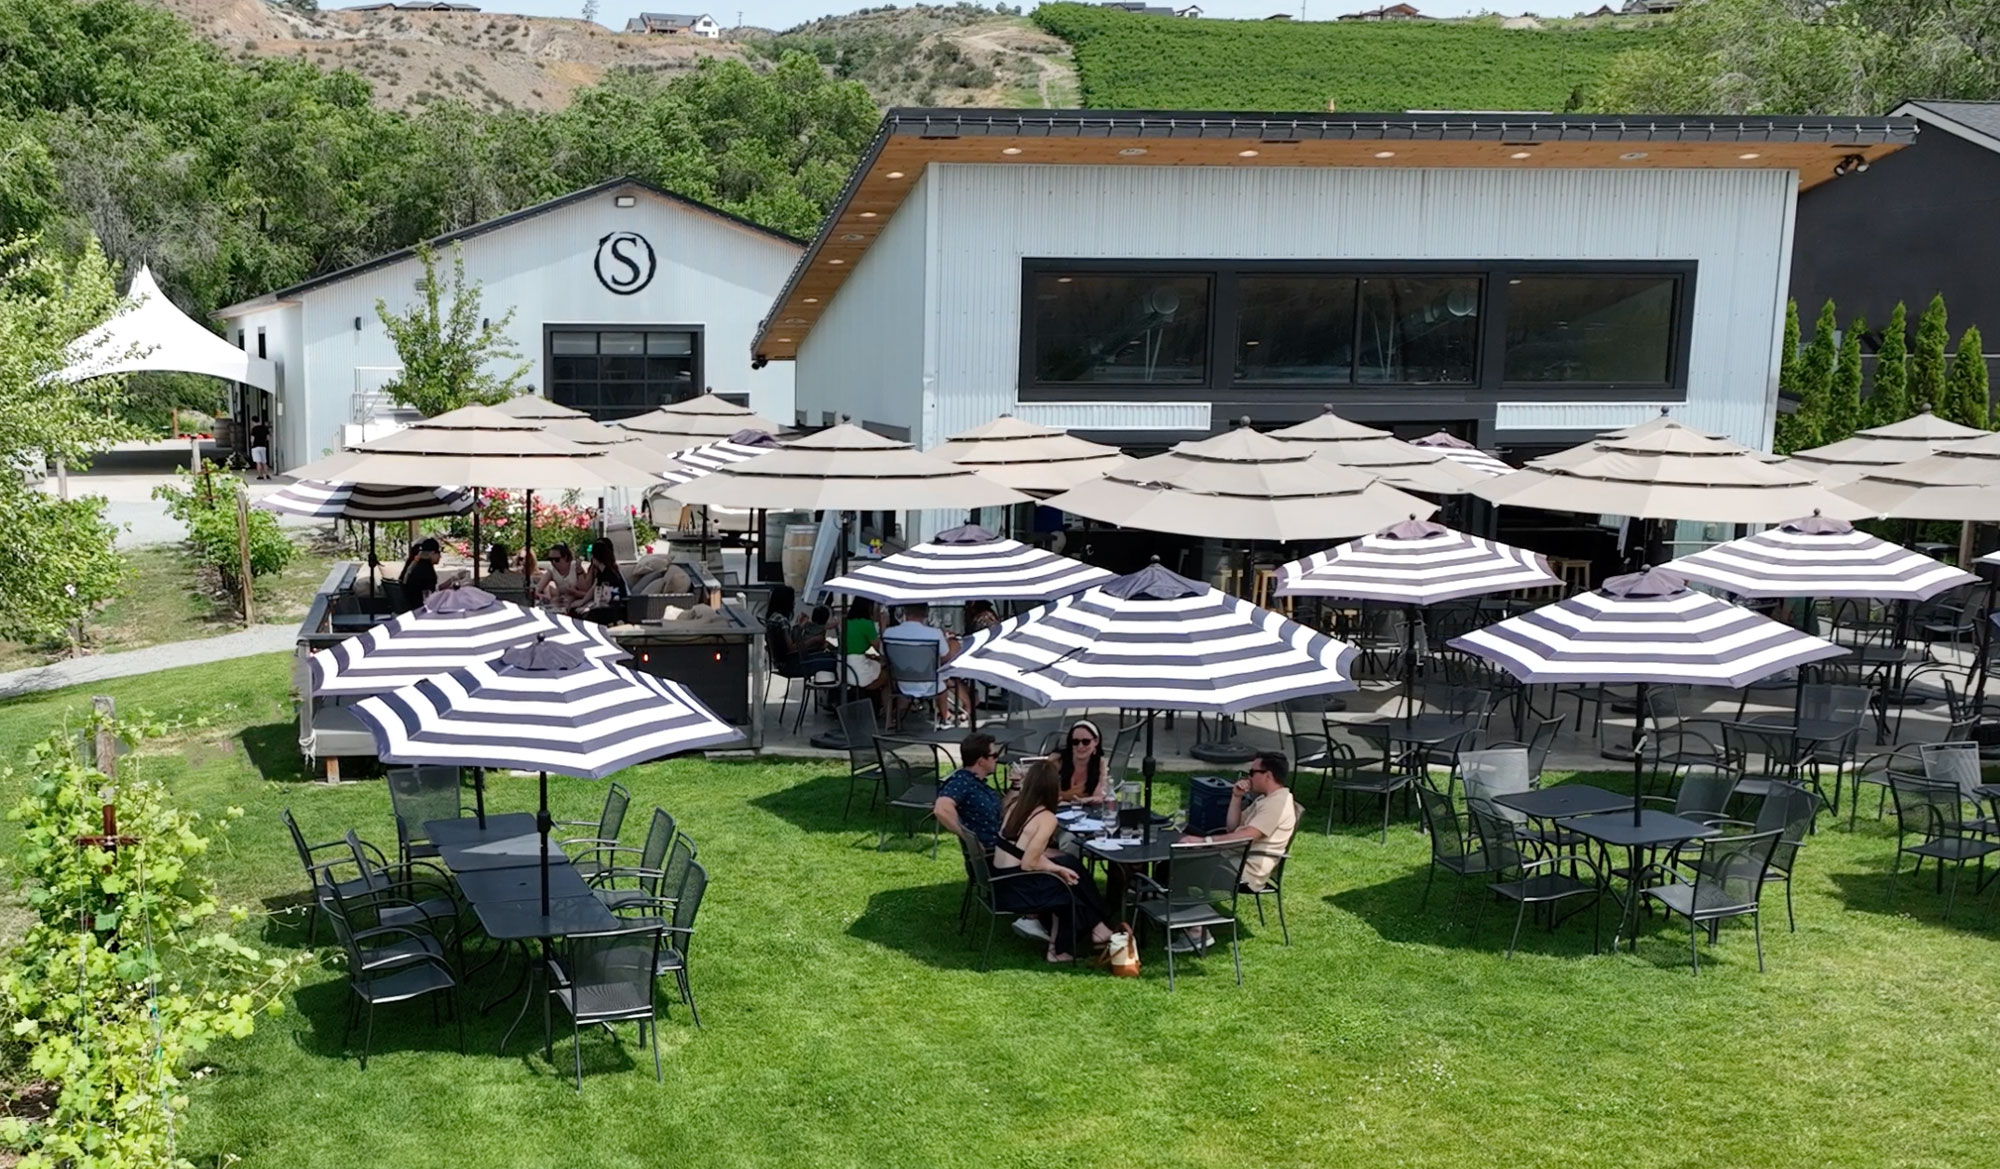 Guests enjoying wine tastings under covered umbrellas on a sunny day at Succession Wines